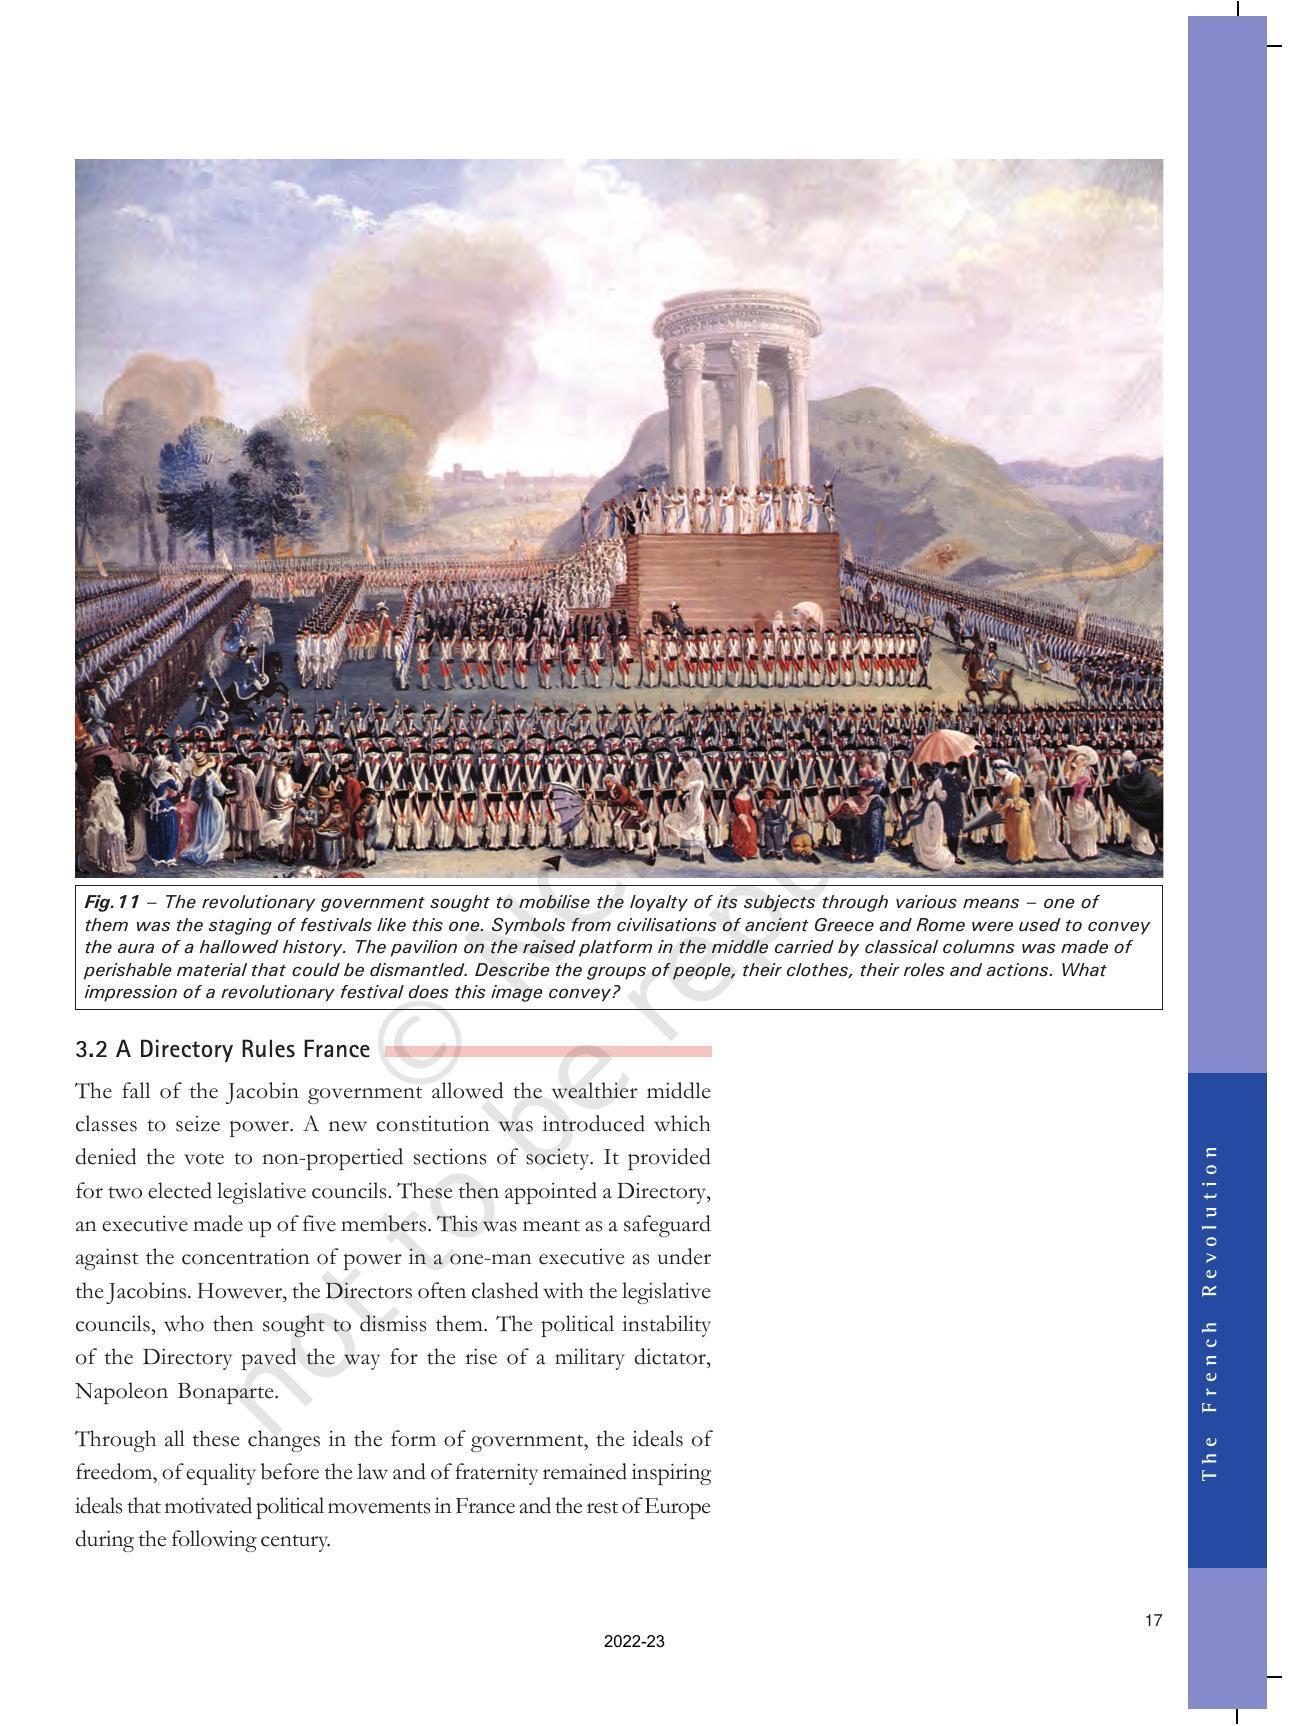 NCERT Book for Class 9 History Chapter 1 The French Revolution - Page 17